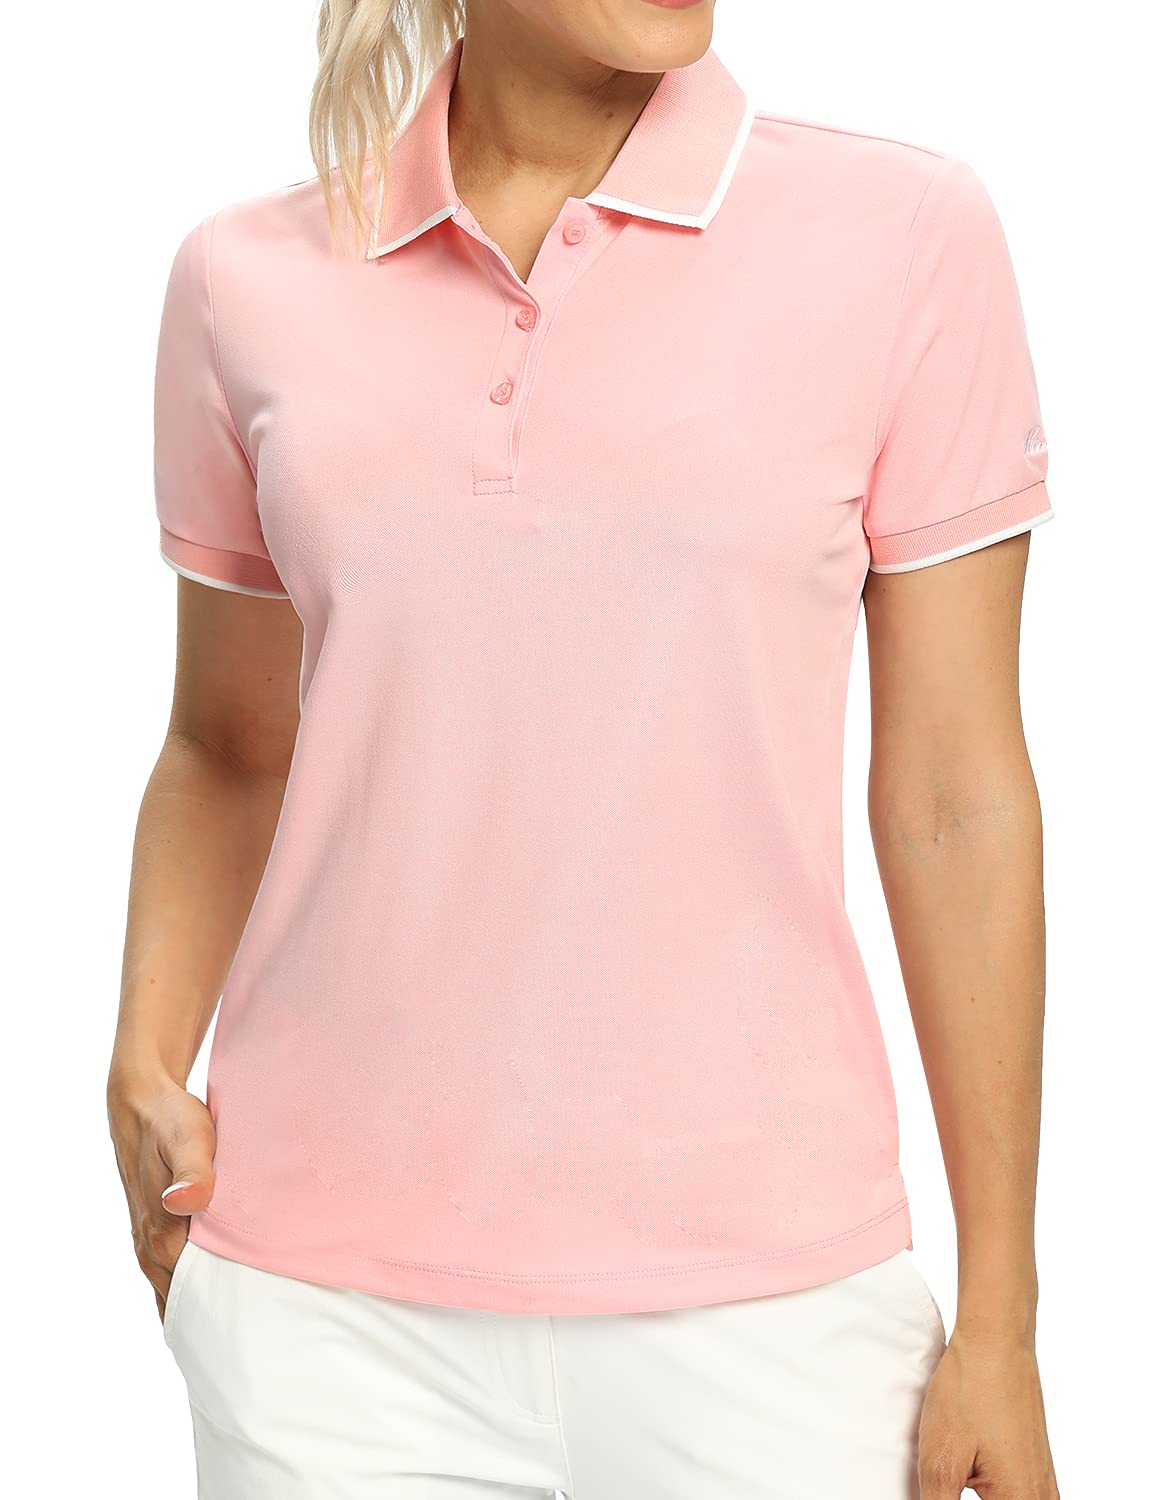 Hiverlay Women Daily Shirts UPF Golf Lightweight Collared Women Quick-Dry 50+ for Tennis Color X-Large Edge Shirts Polo Work Color Shirts Edge Contrast Tops Pink-contrast